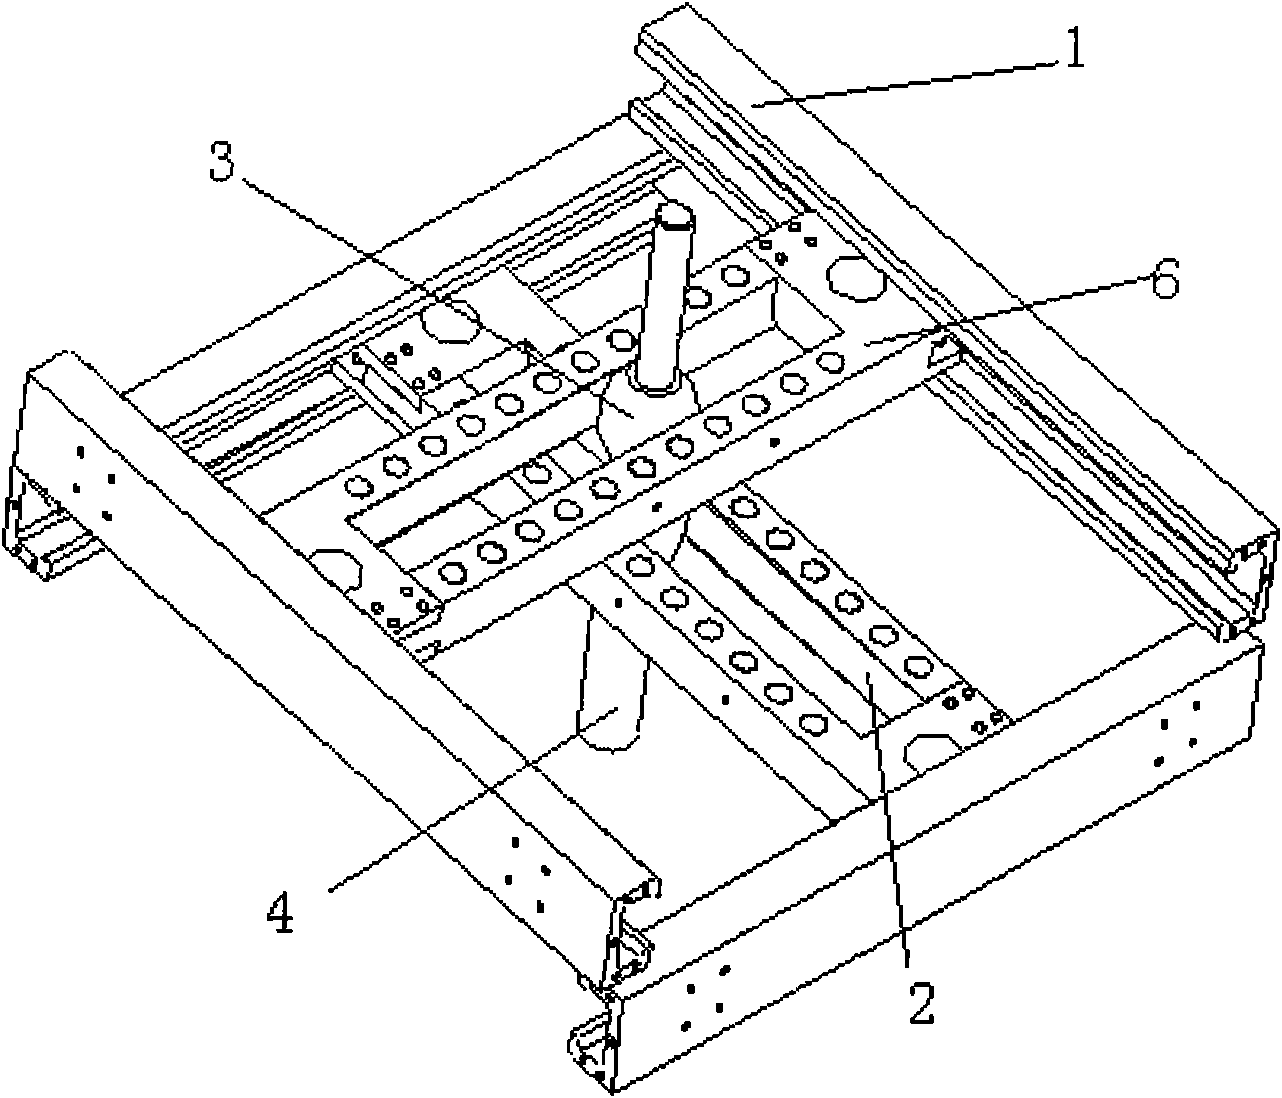 Test loading device of airplane joystick type control system